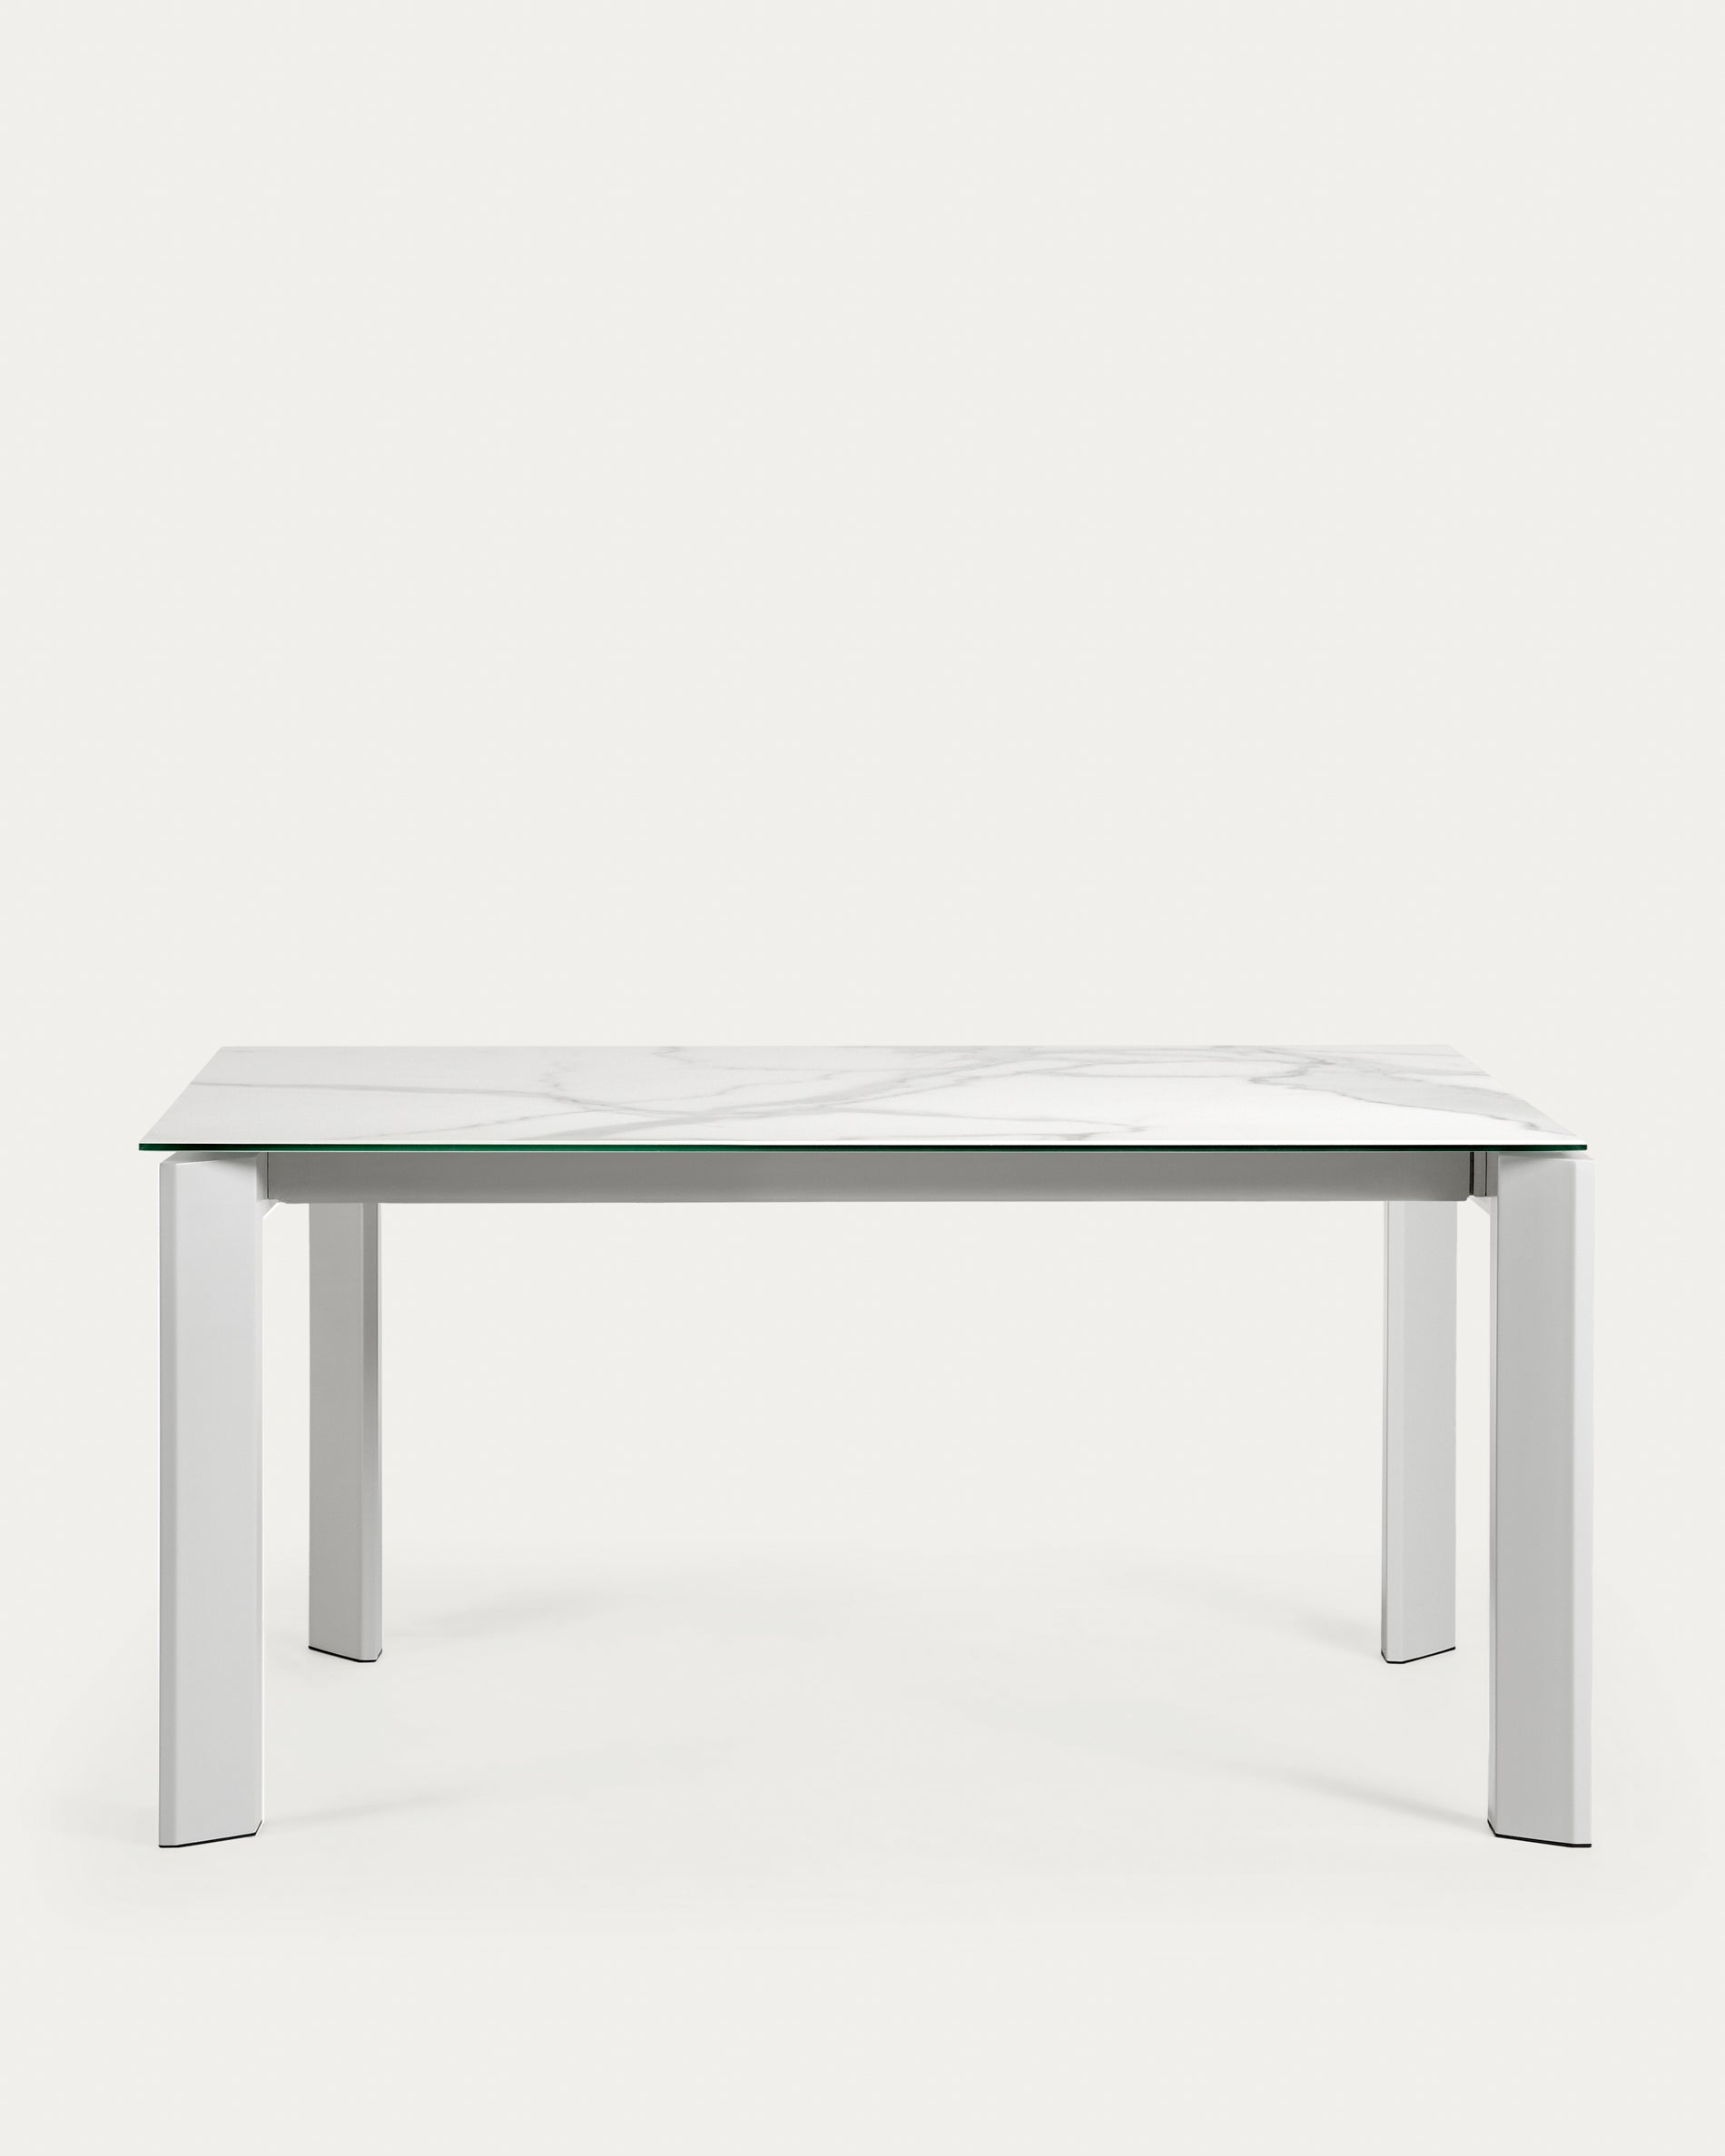 Axis porcelain extendable table with white Kalos finish and gray legs 160 (220) cm